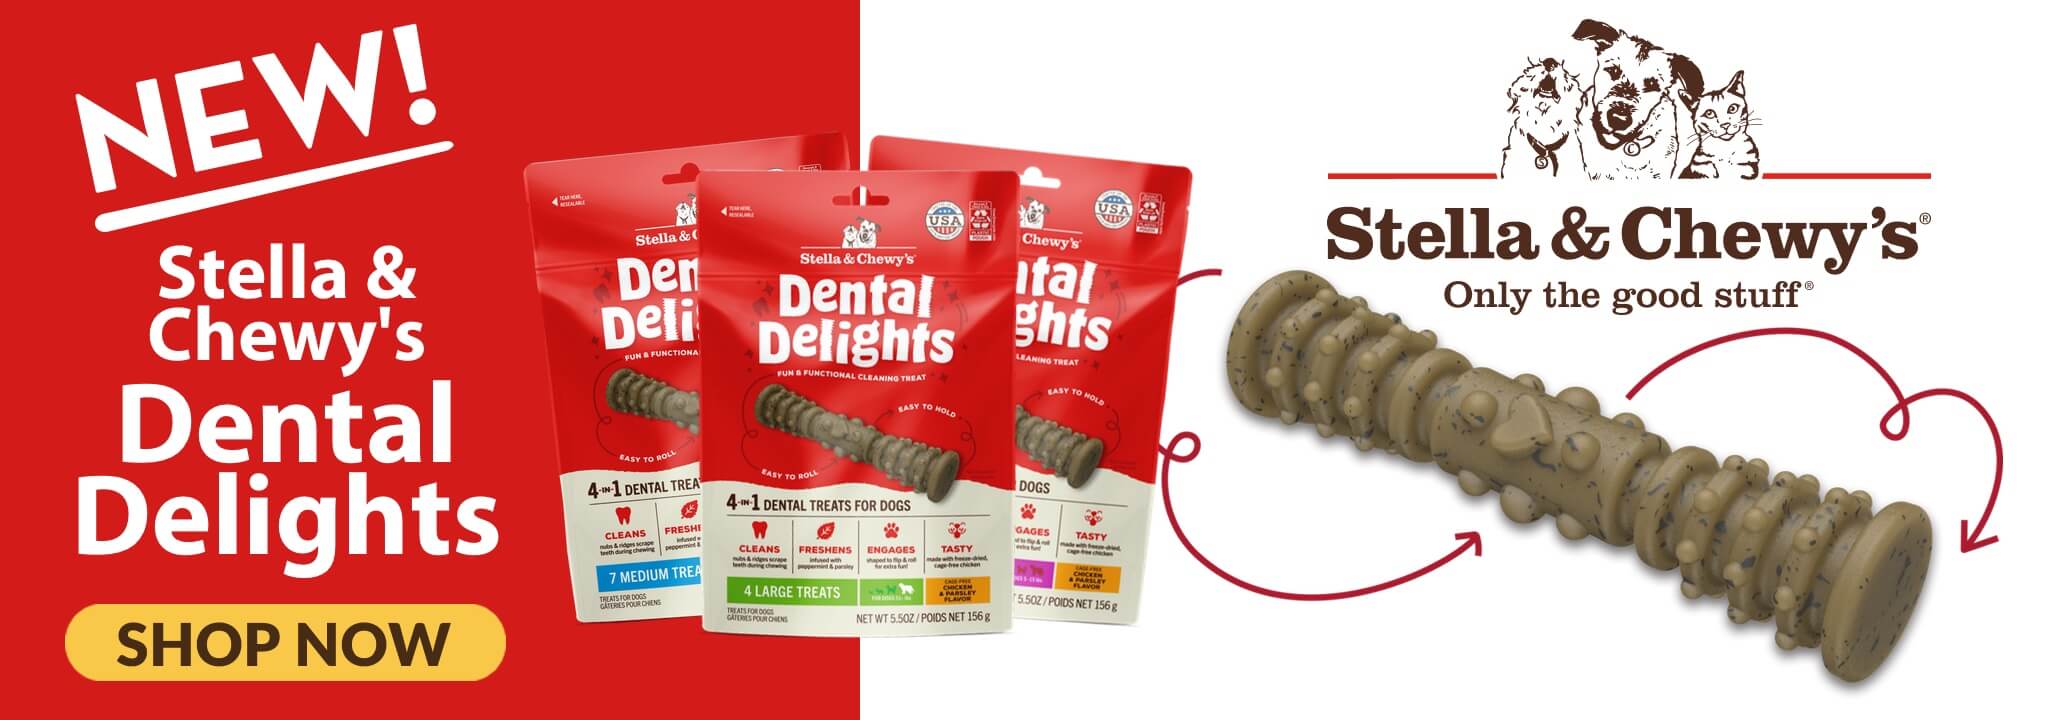 New Stella & Chewy's Dental Delights Shop Now